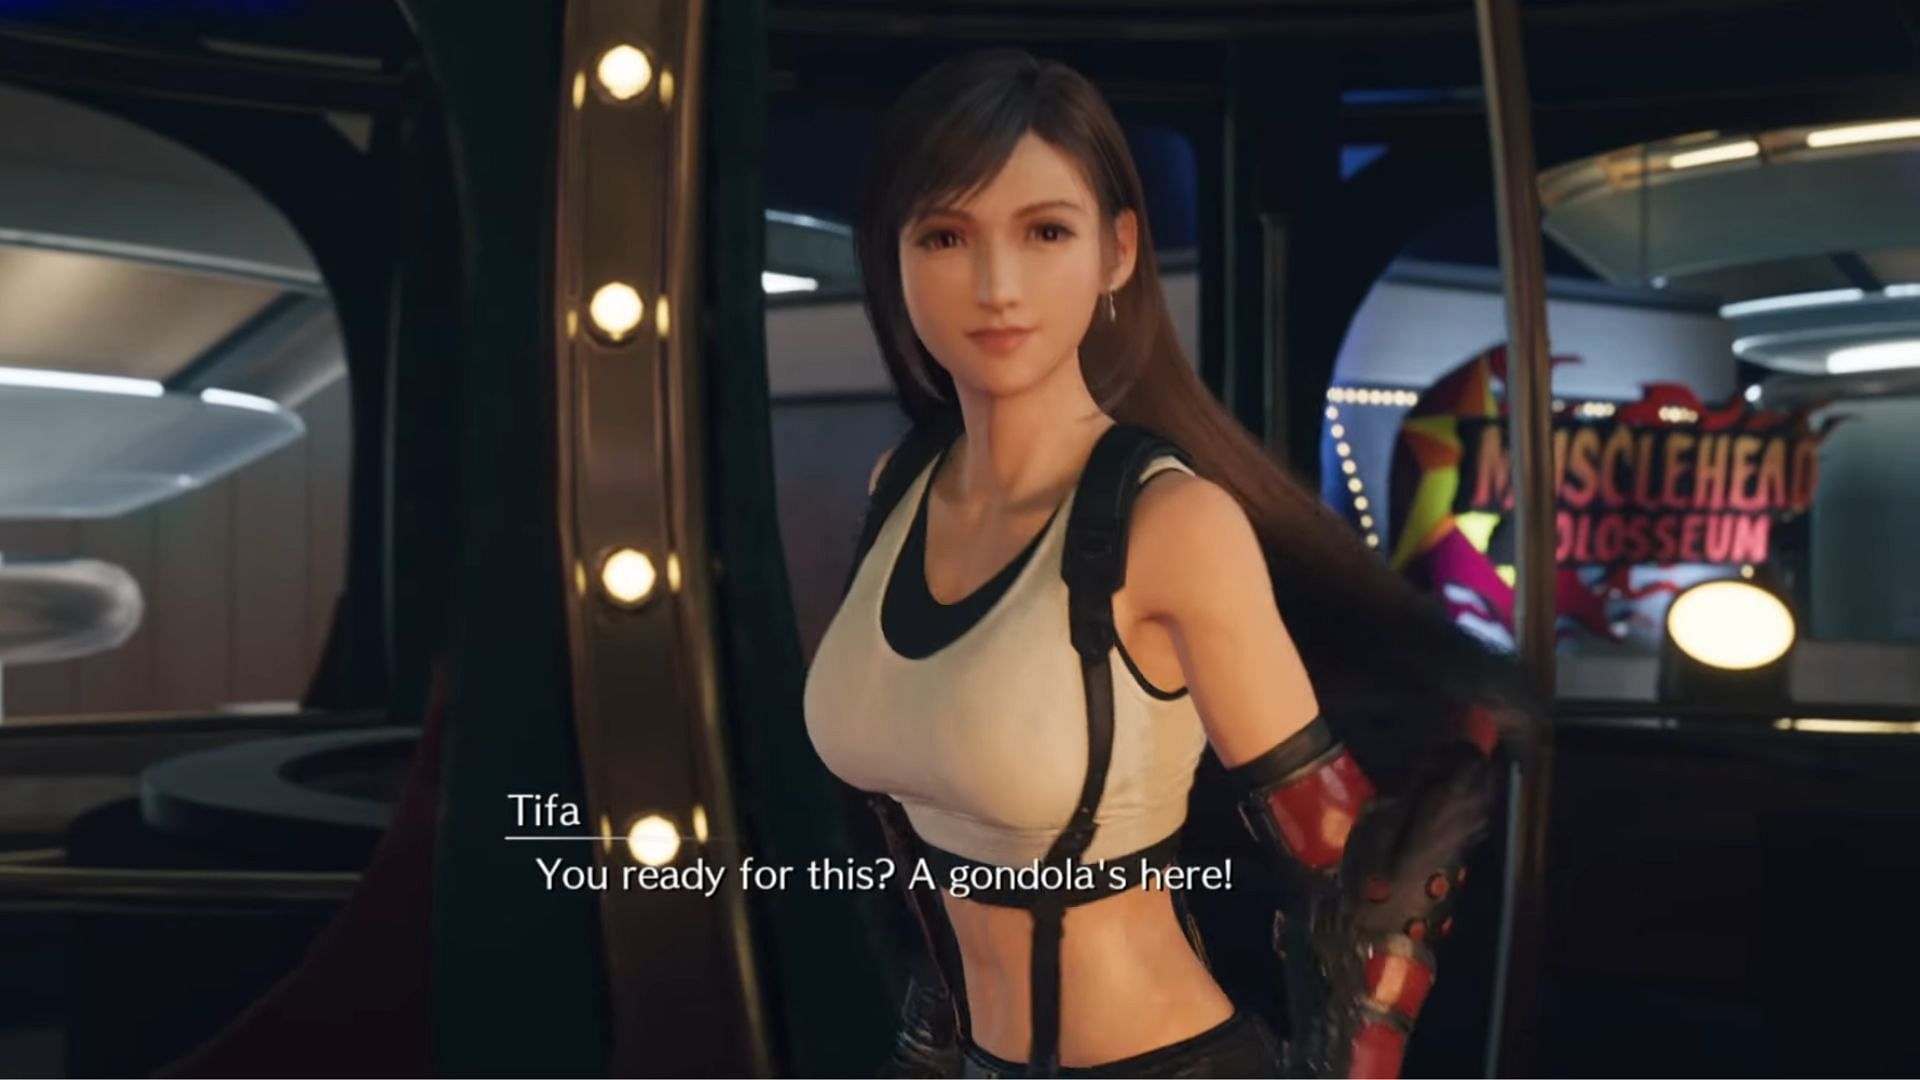 Tifa will ask you out during one of the chapters in the story. (Image via Square Enix)